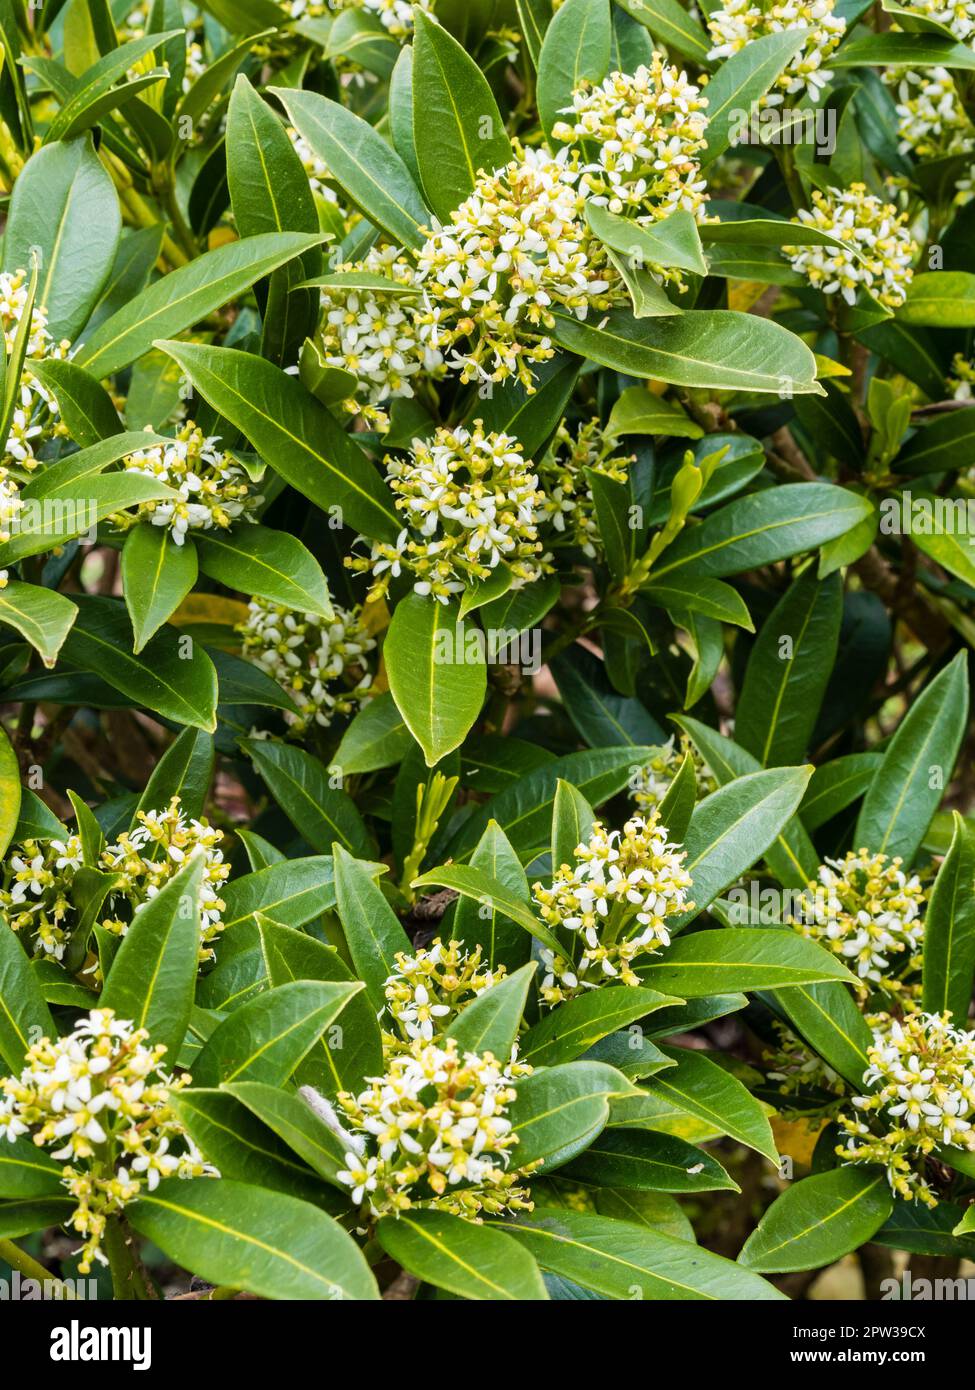 Massed flower heads of the spring flowering evergreen shrub, Skimmia japonica 'Scarlet Dwarf' Stock Photo